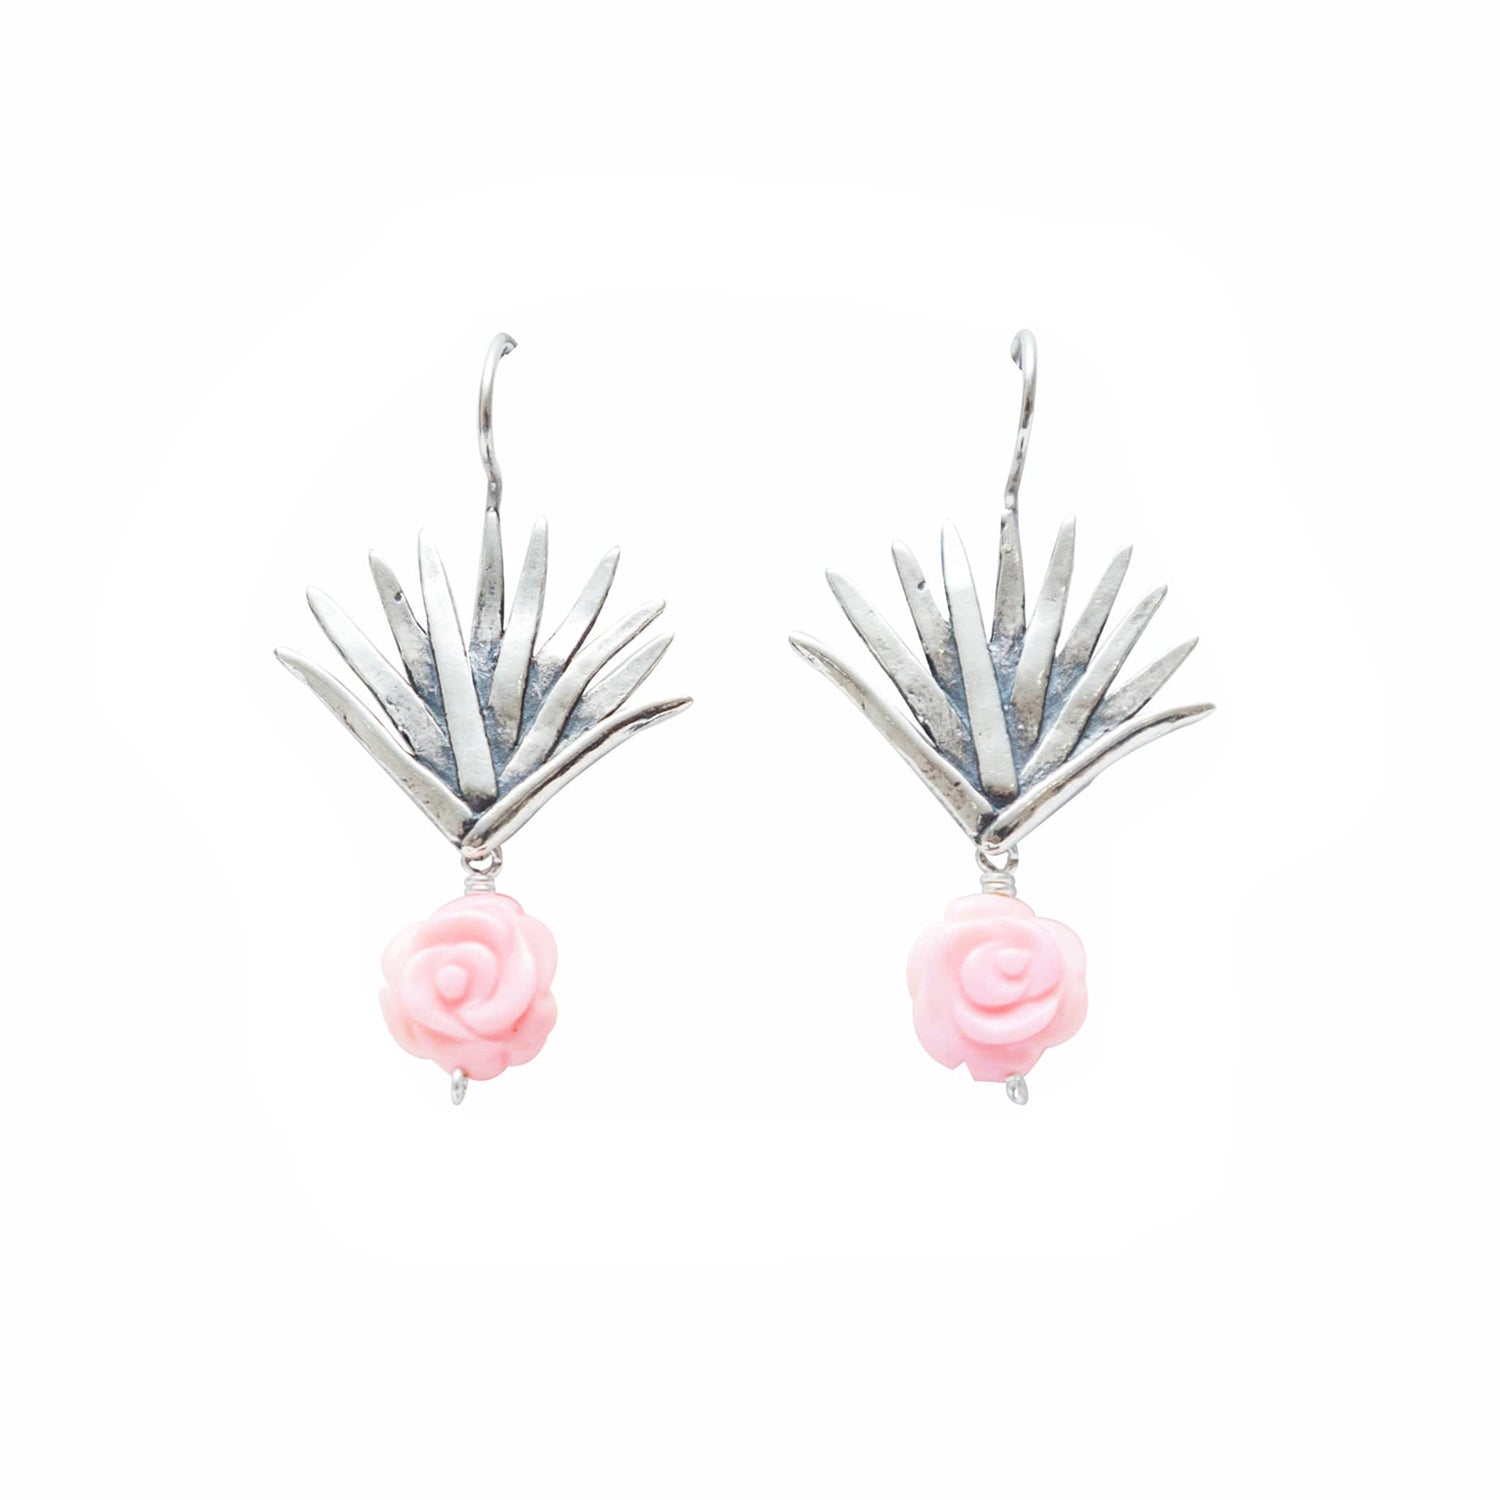 Aretes Agave y Rosa